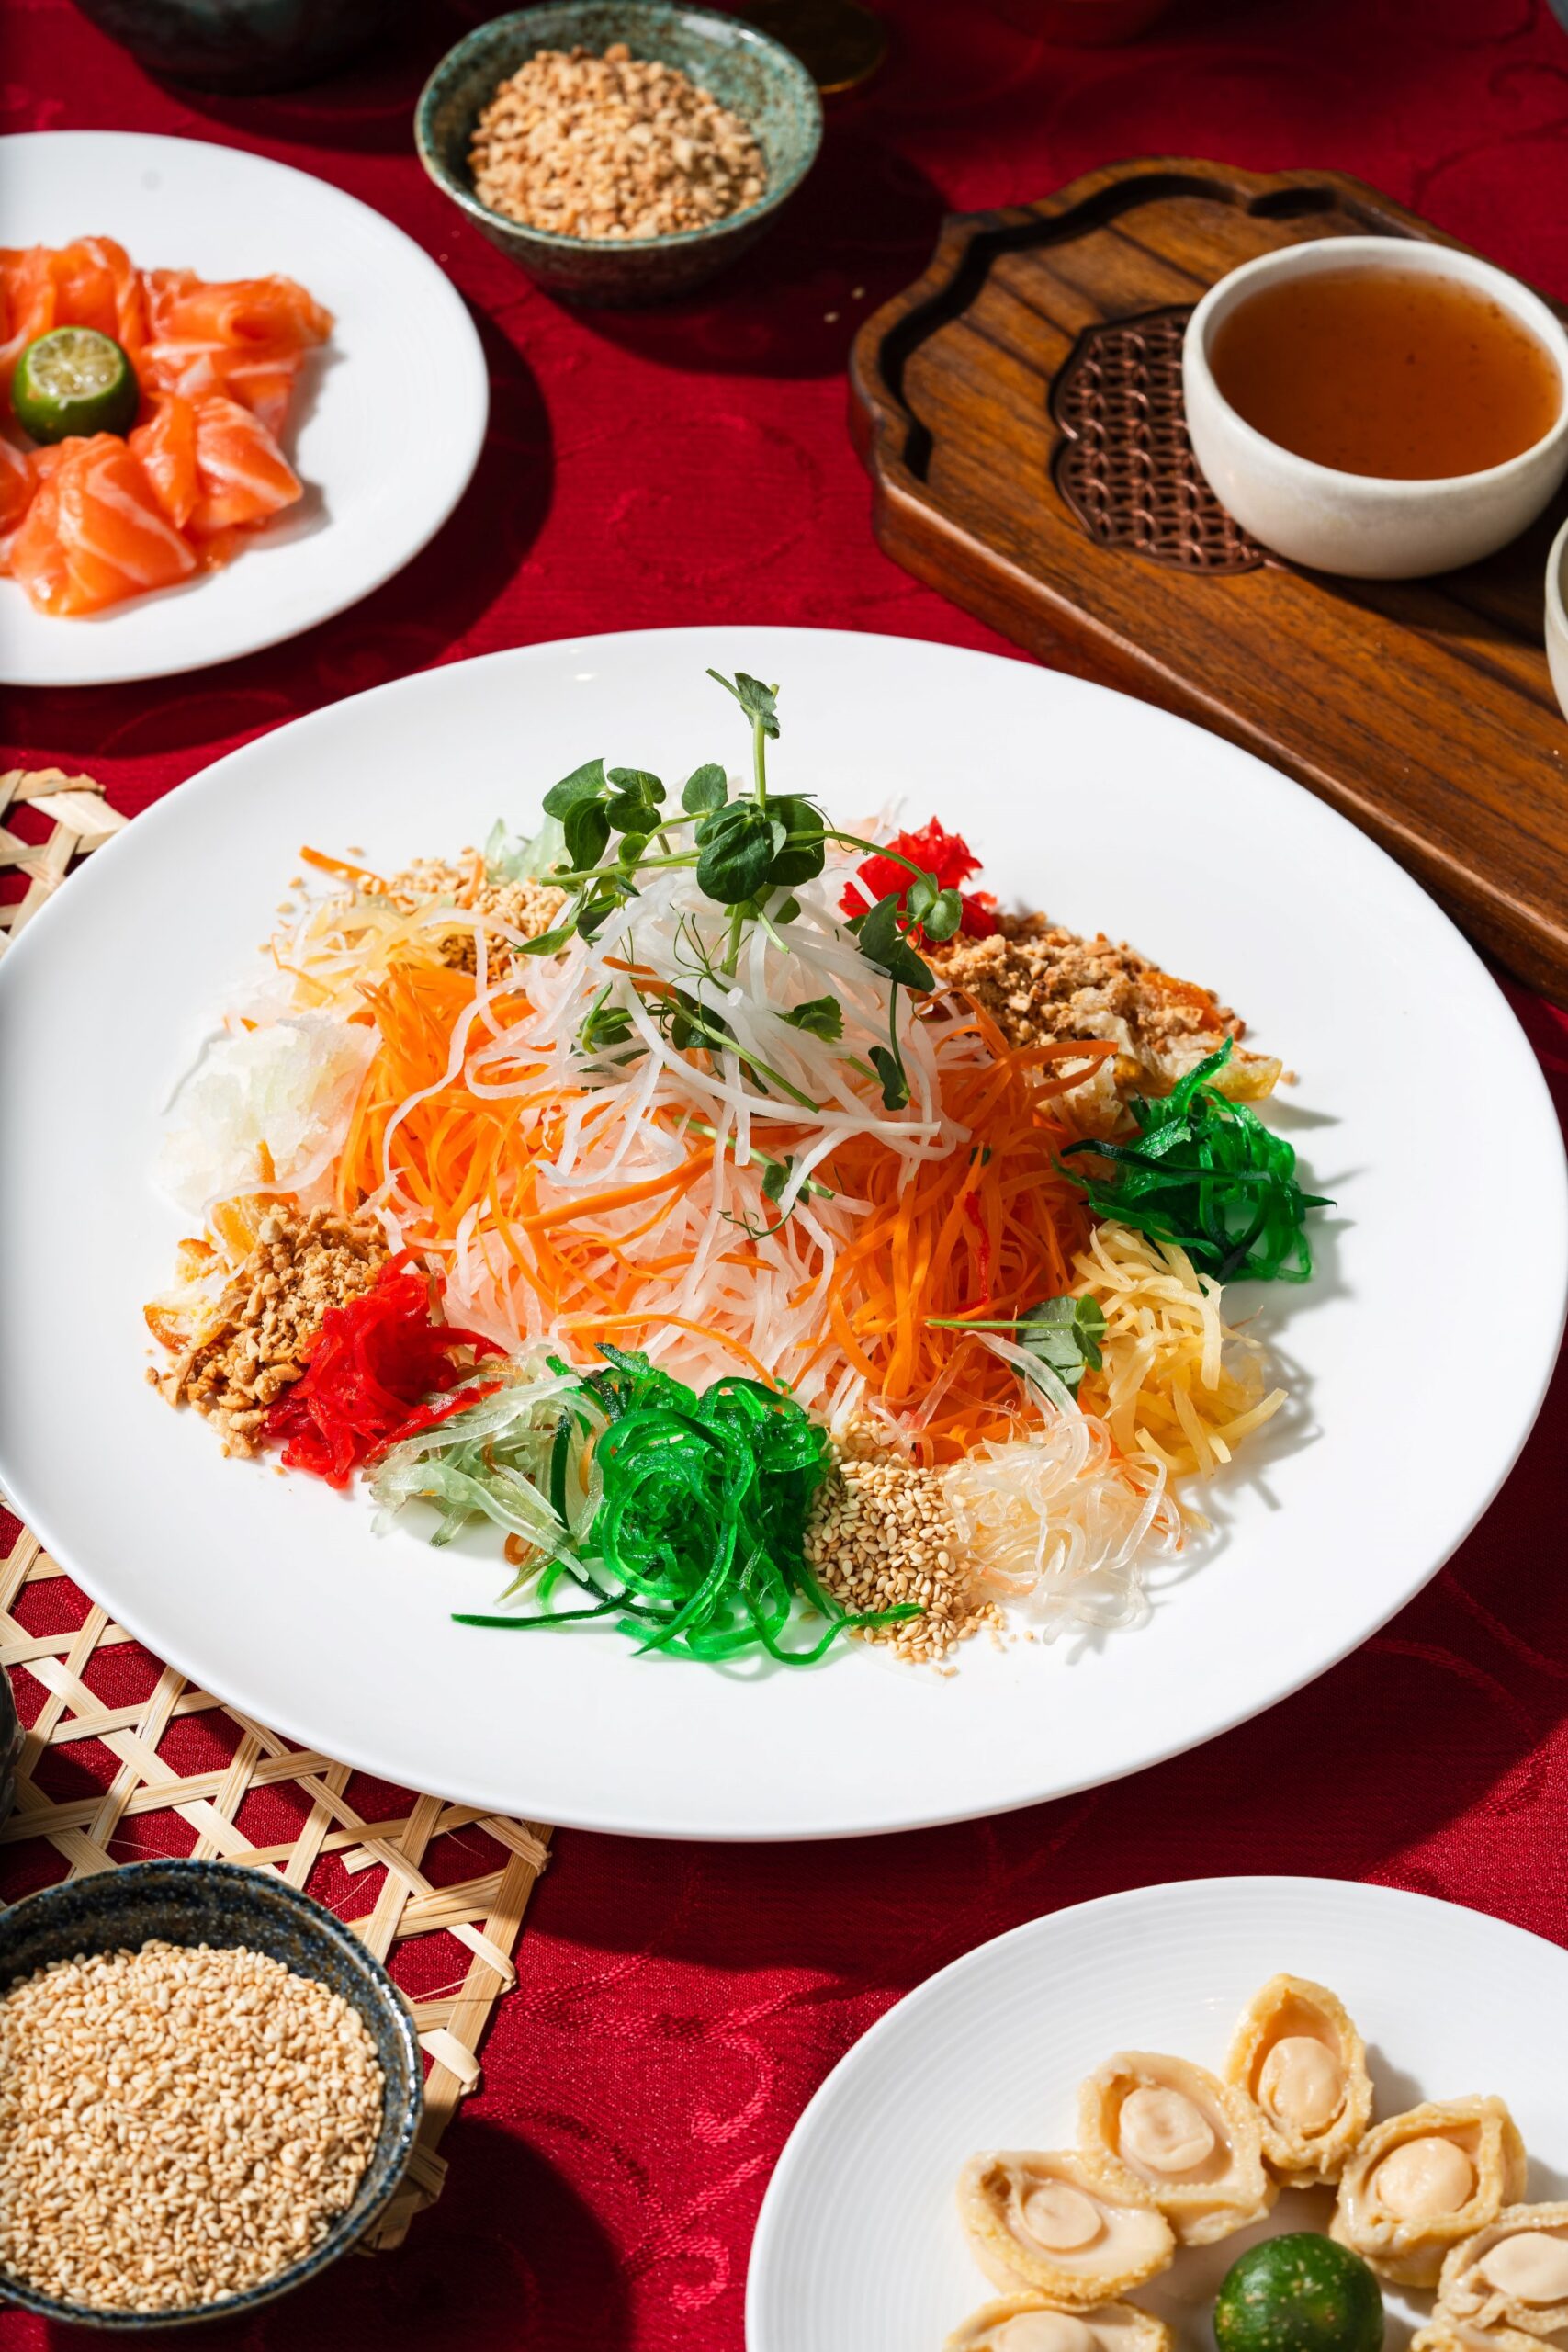 "Yee Sang" or "yu sheng" should be mixed and tossed together as it is believed to bring good fortune